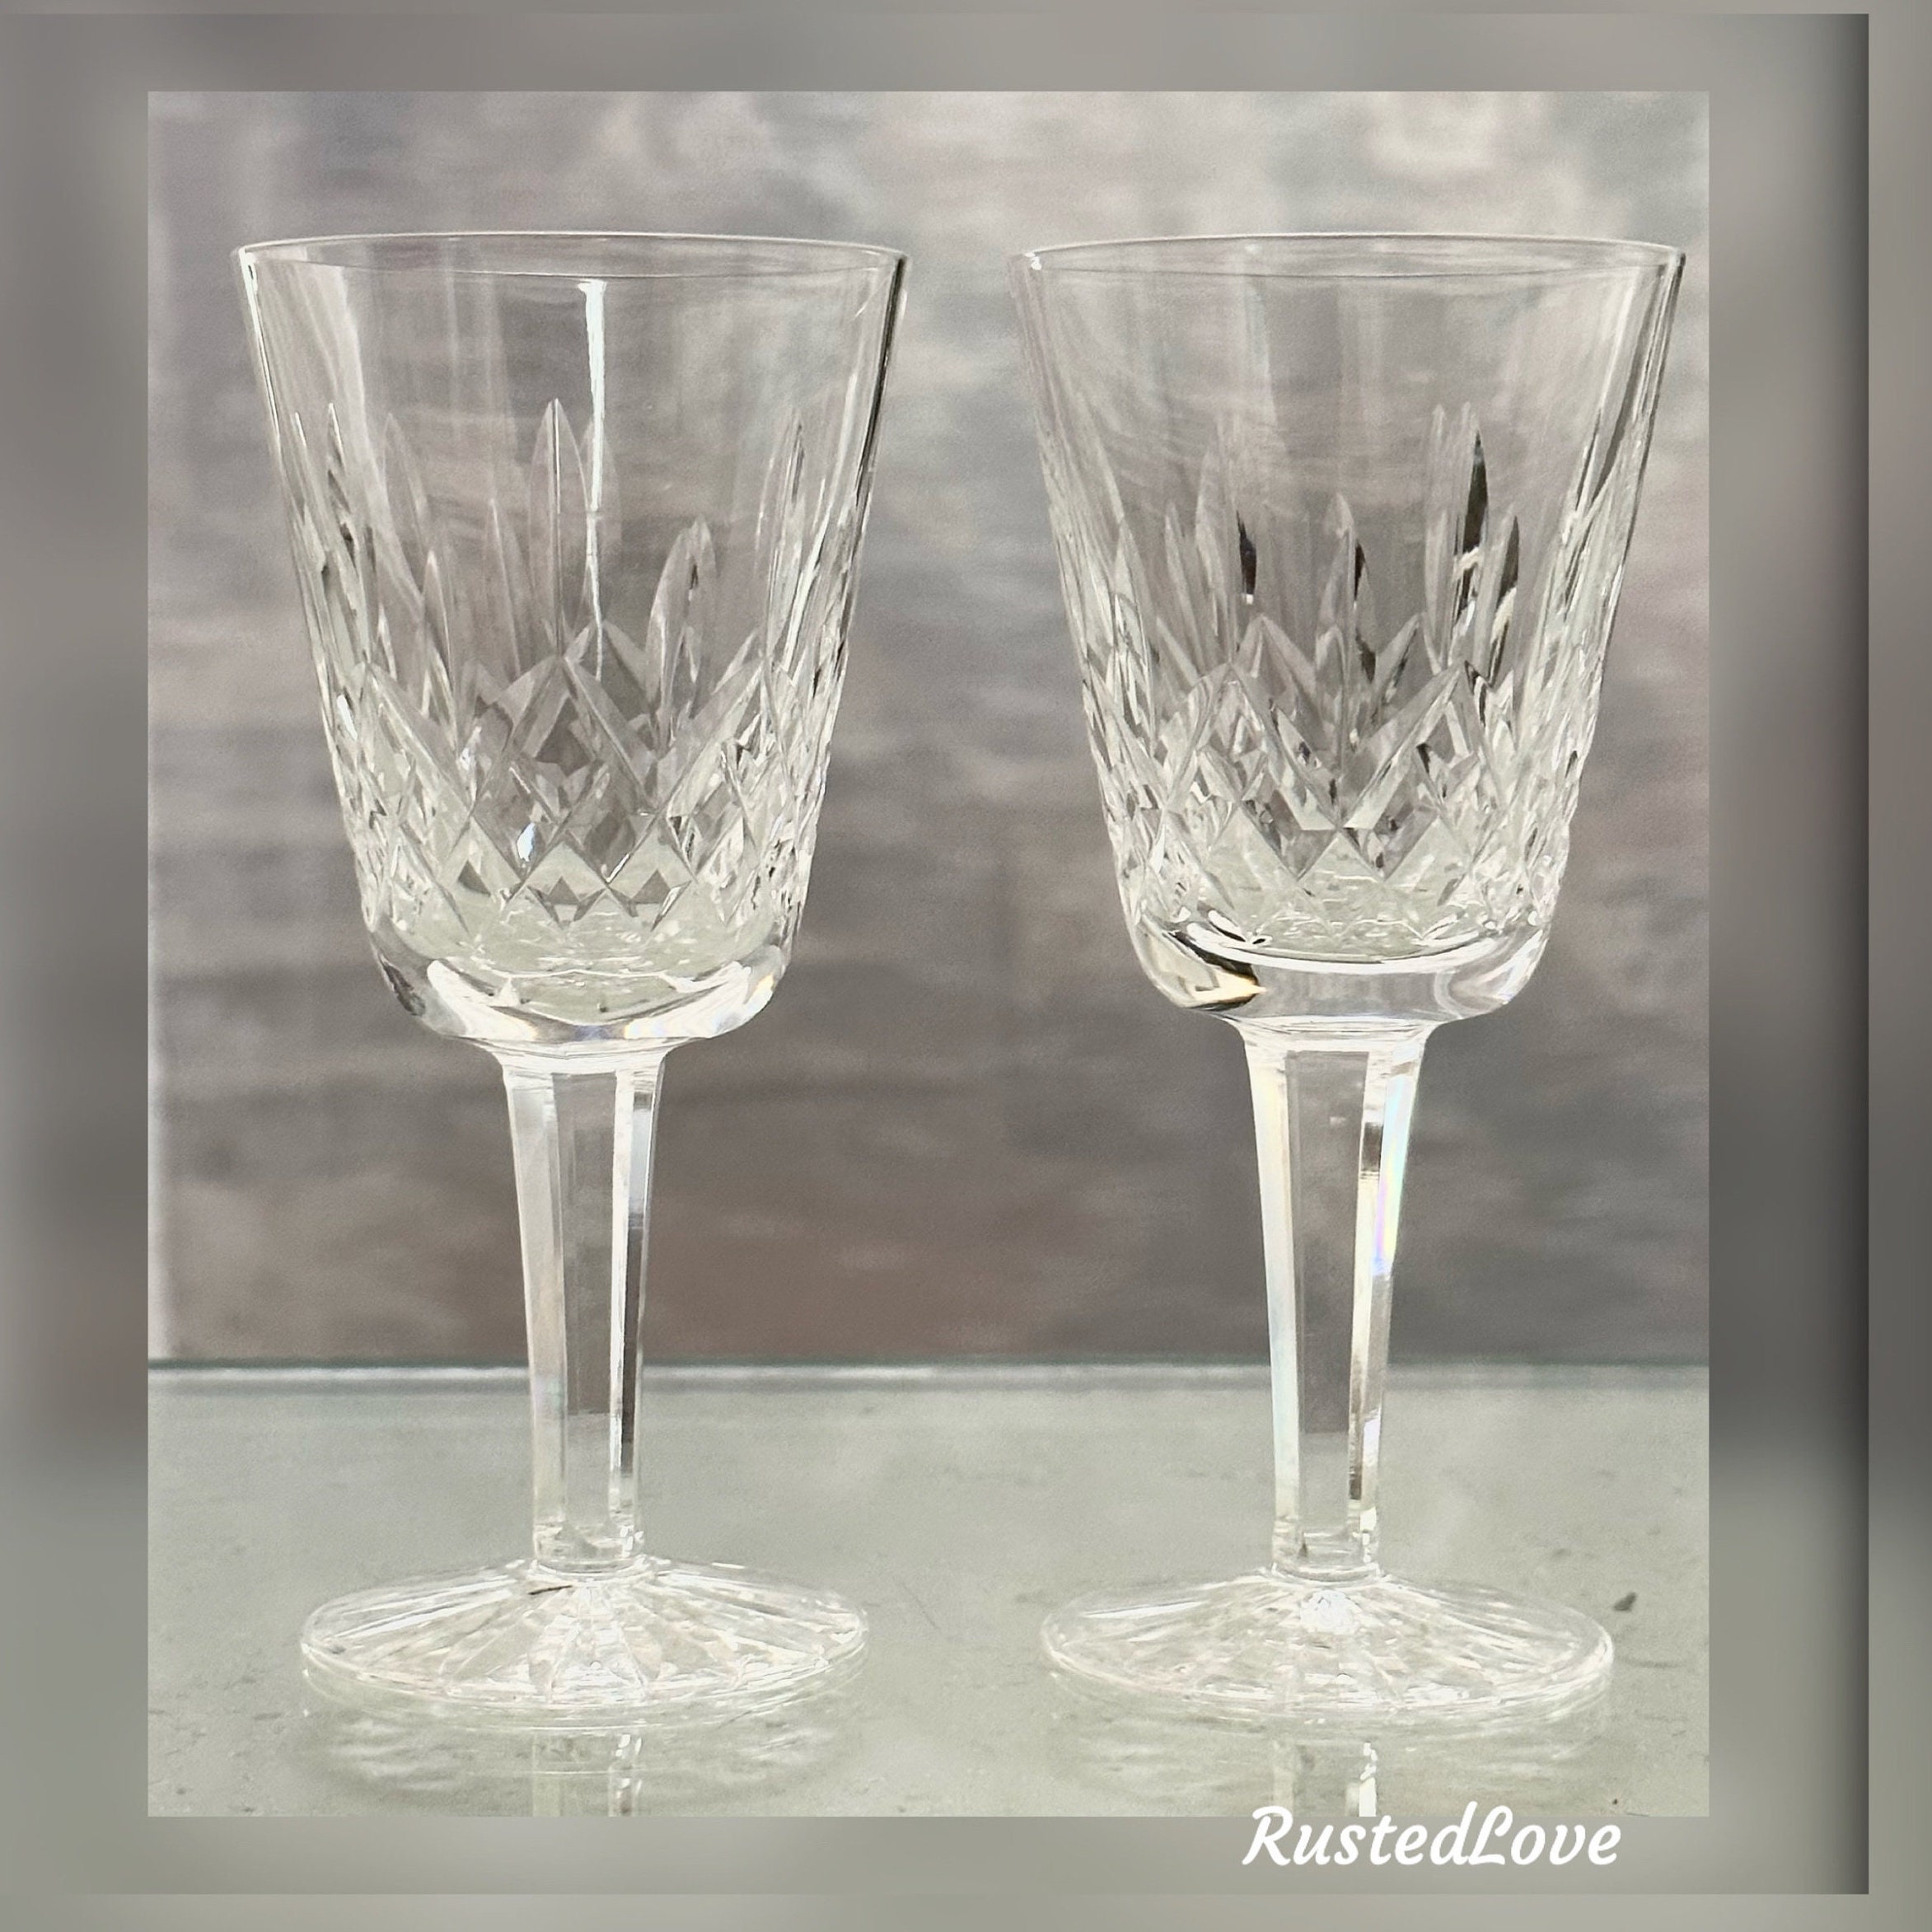 Sold at Auction: 5 Waterford Crystal Water Glasses